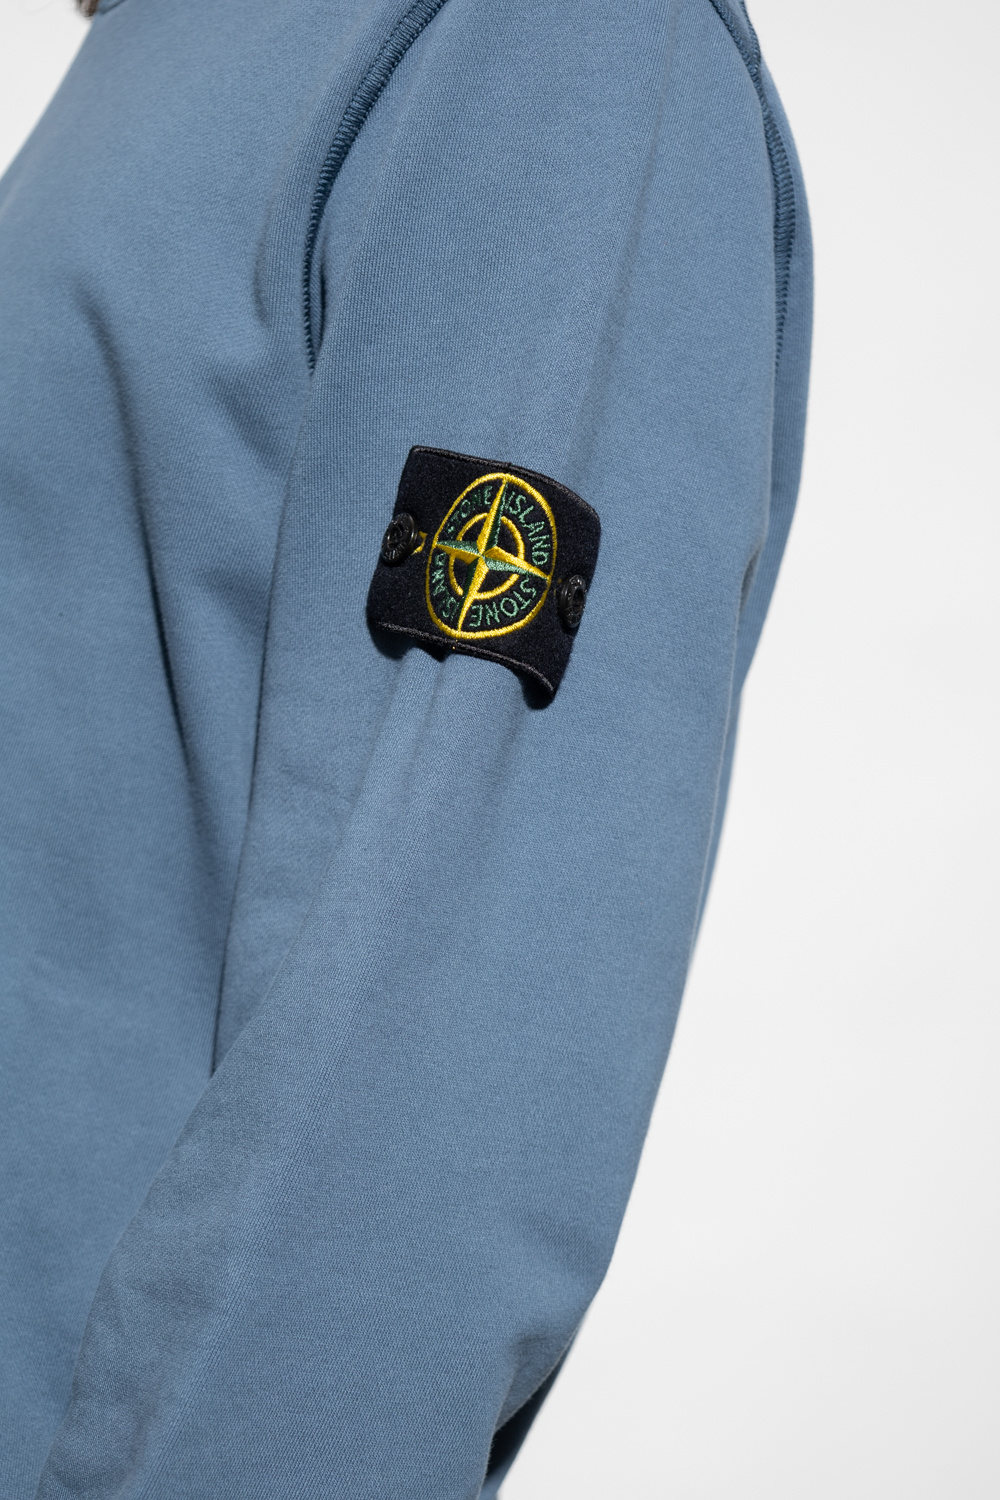 Stone Island ON AIR x Alpha Industries Come Together for an Intricate MA-1 Bomber Jacket